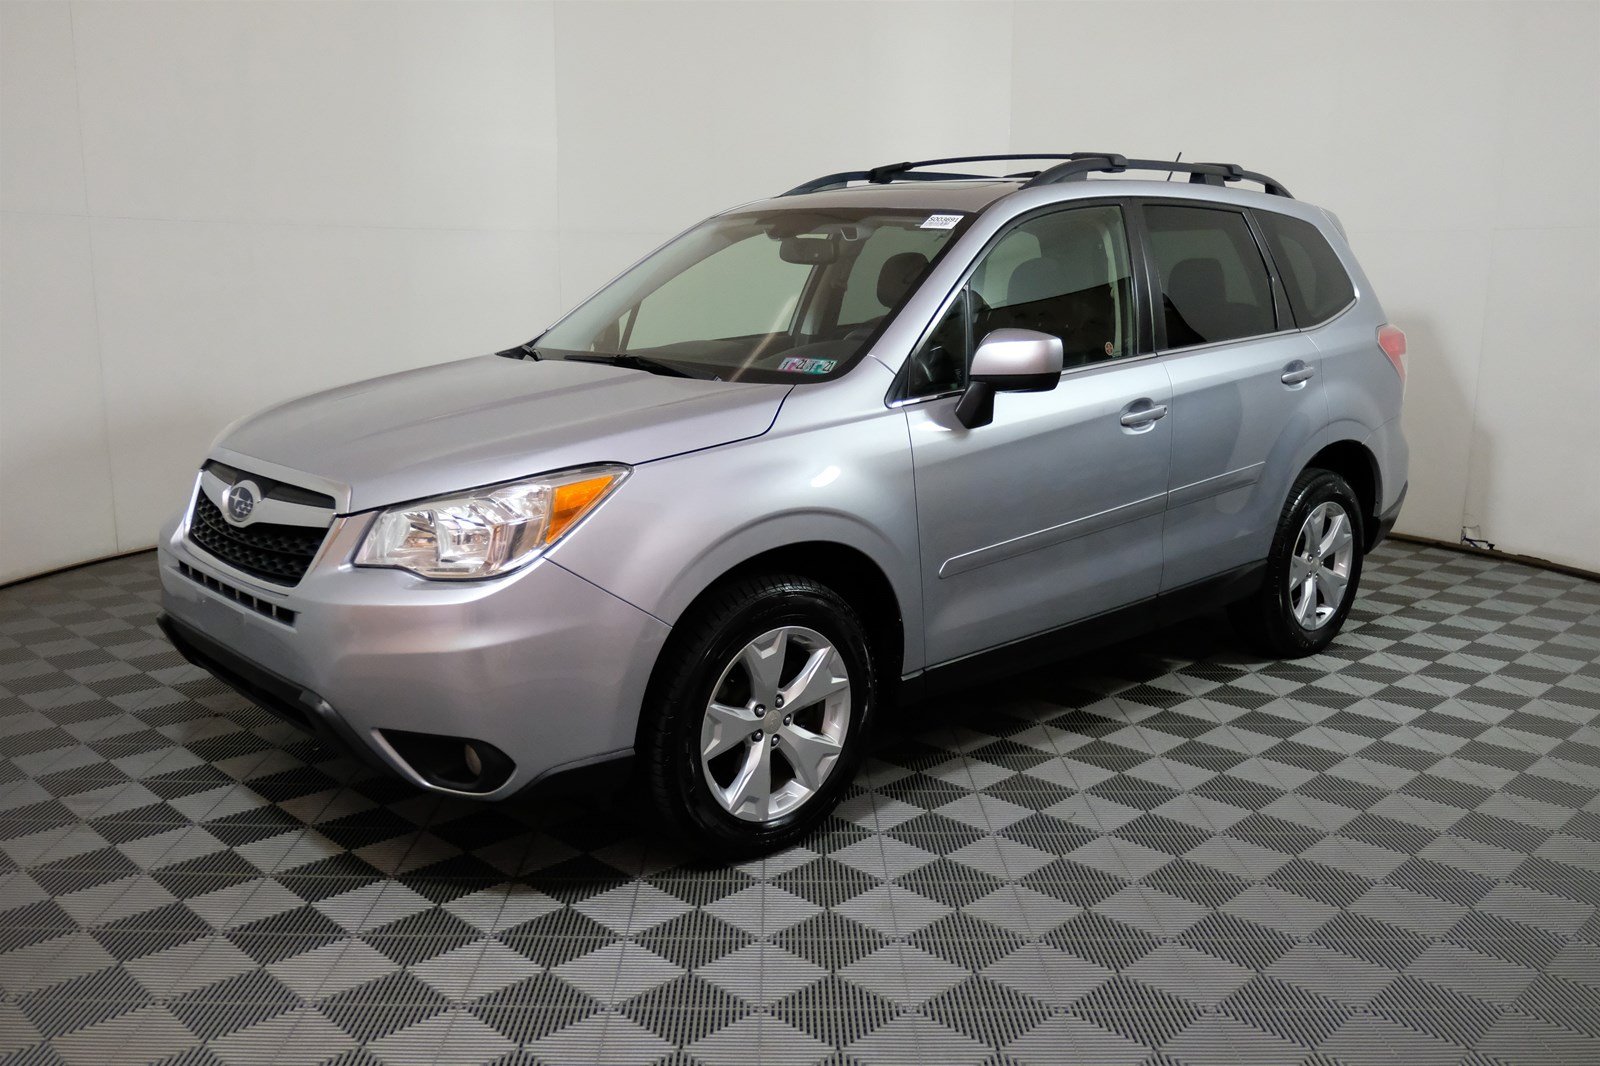 PreOwned 2015 Subaru Forester 2.5i Limited AWD Sport Utility